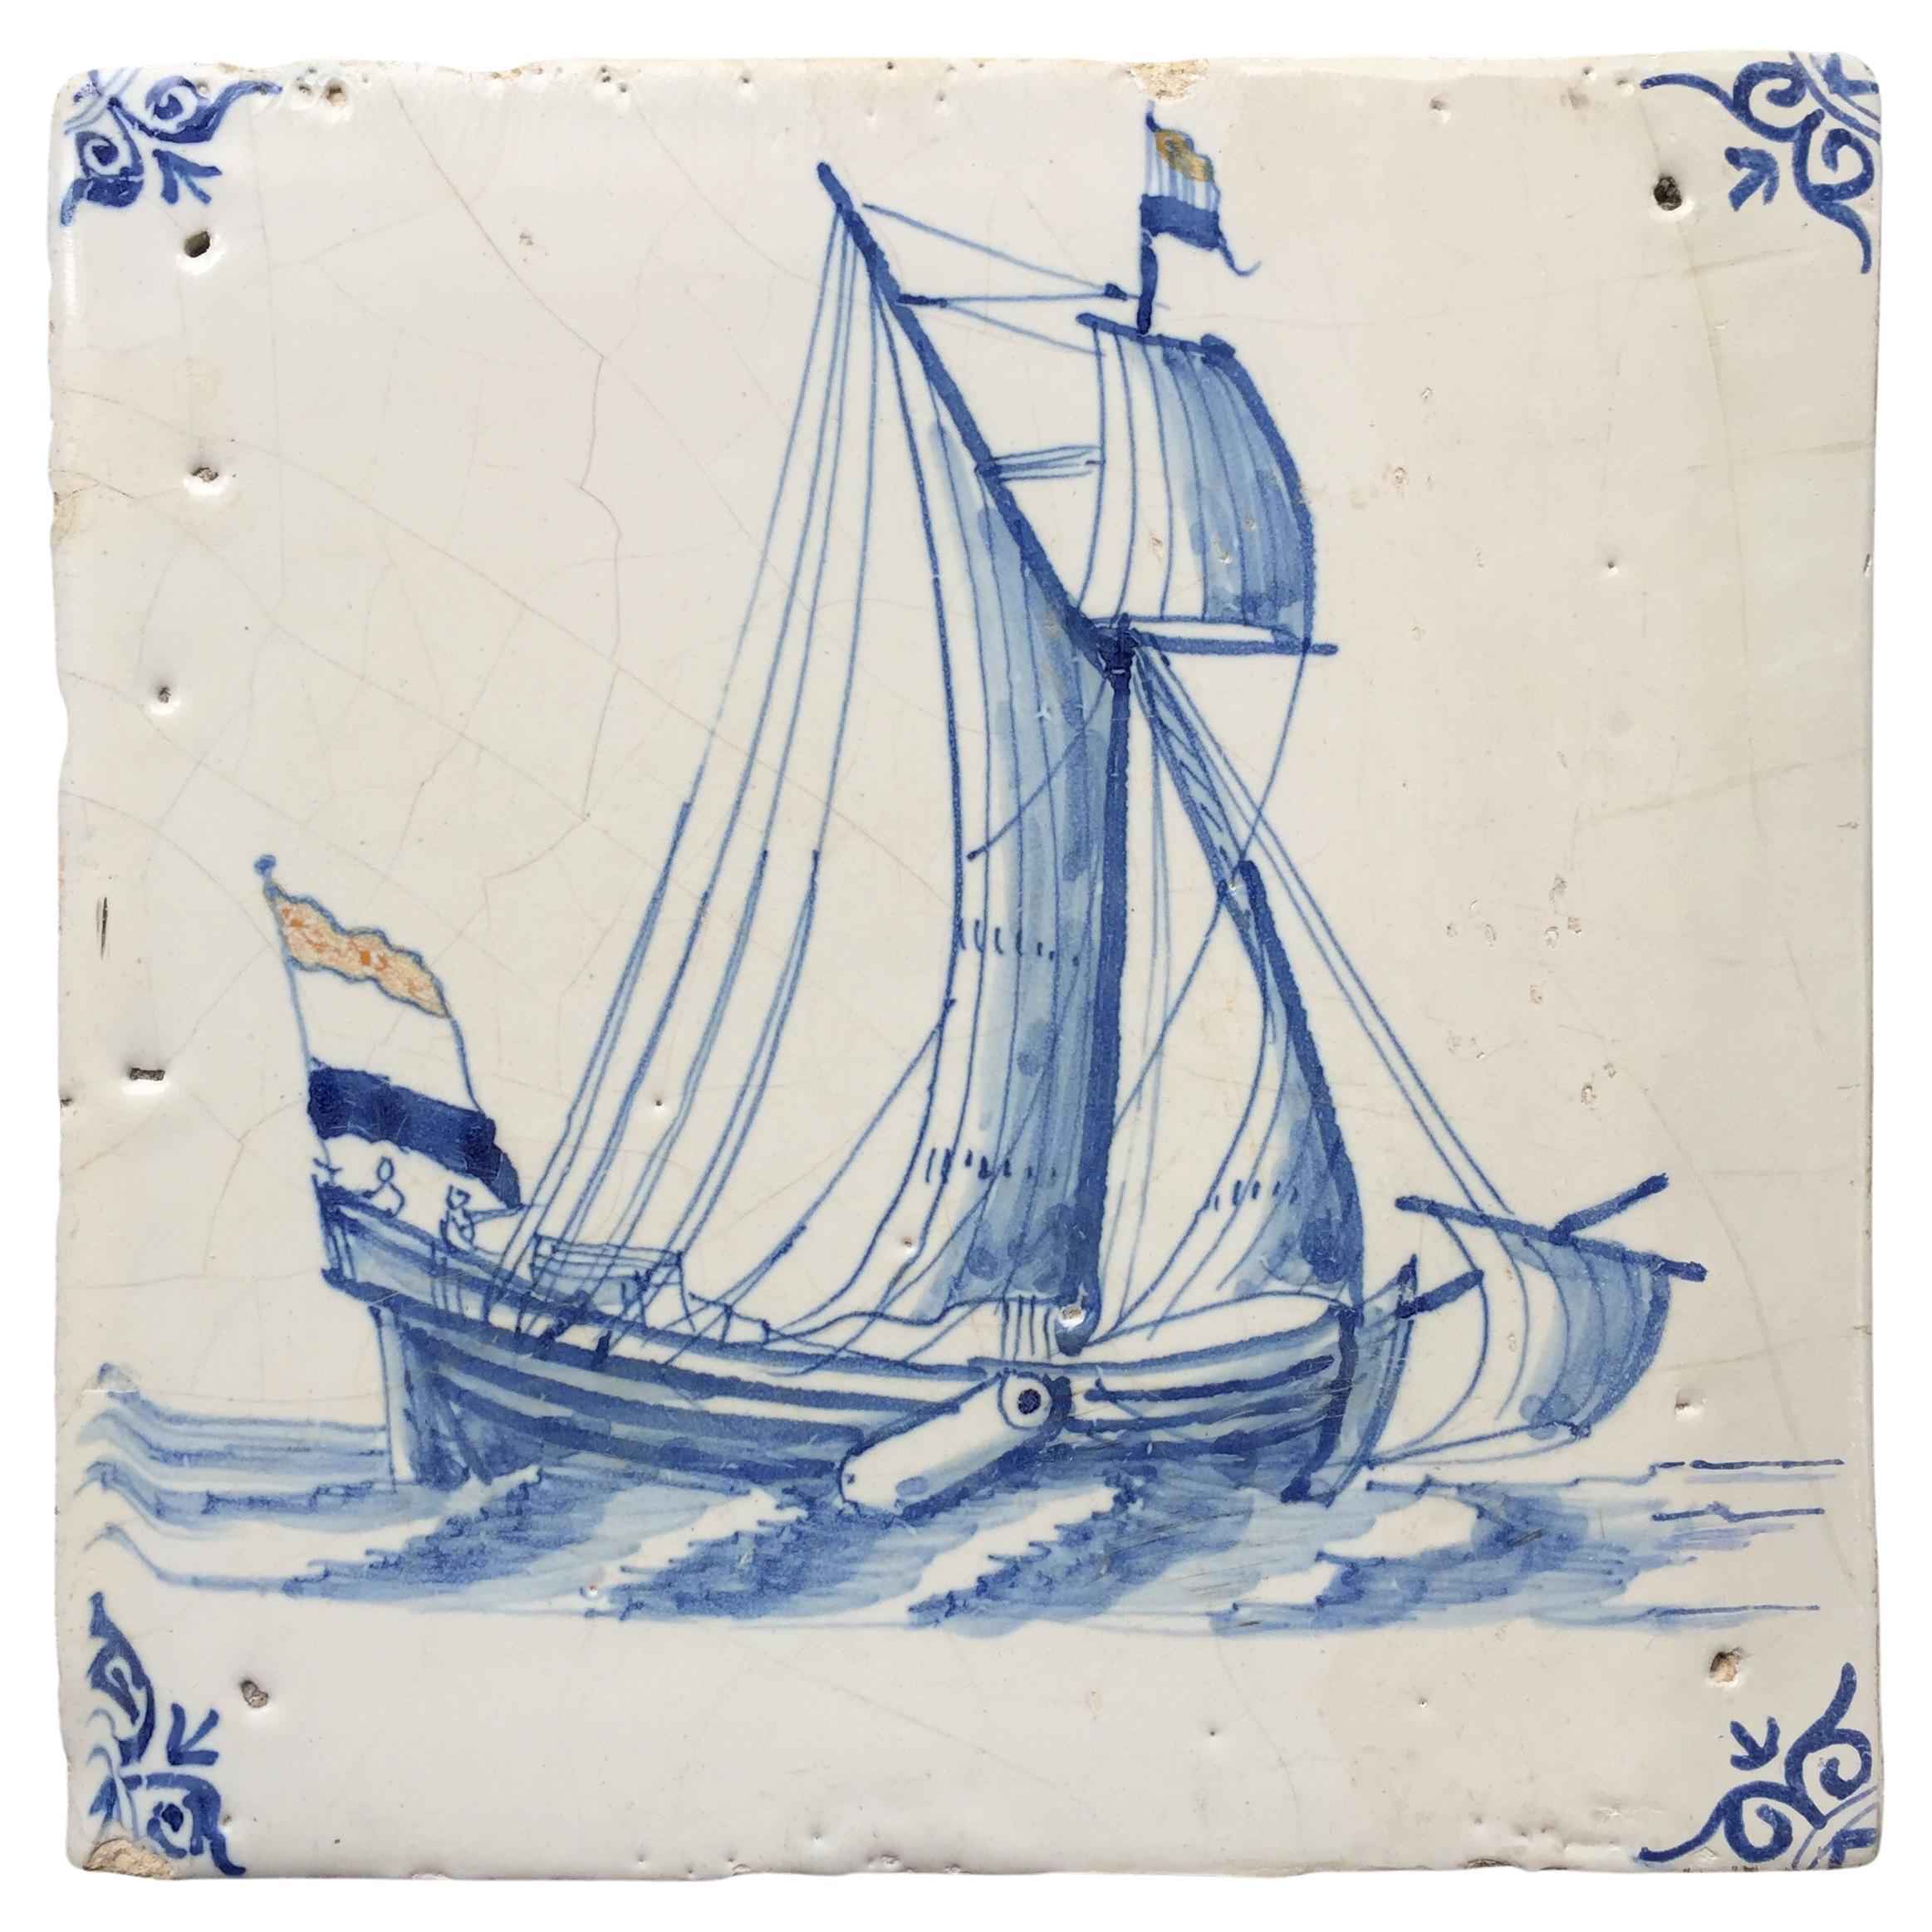 Rare Dutch Delft Tile with Yacht with Dutch Flags, Early 17th Century